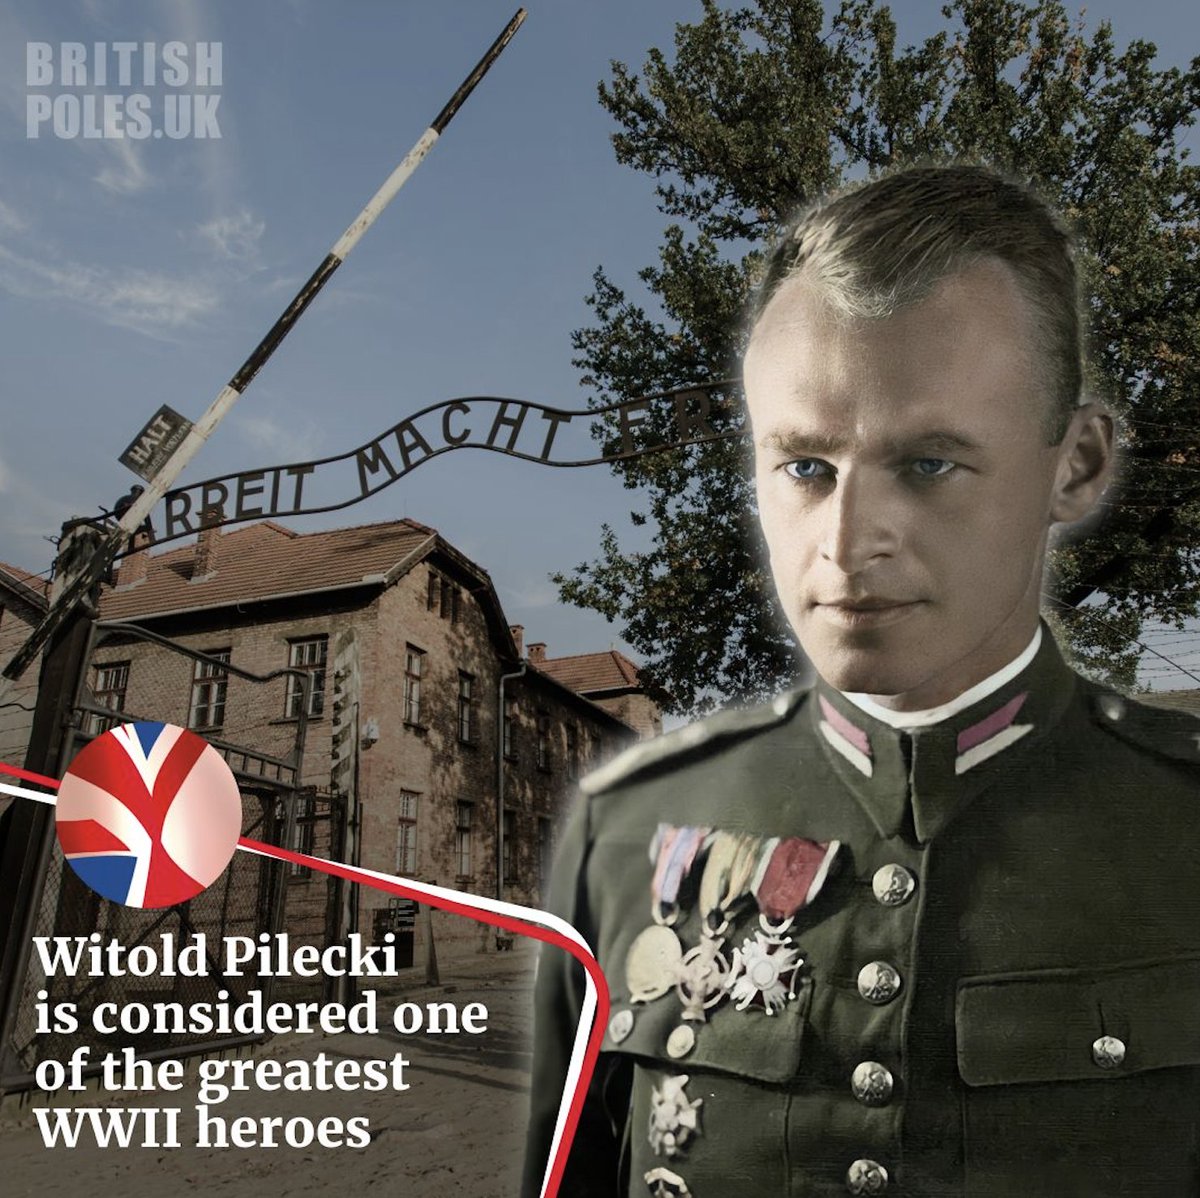 Witold Pilecki is considered one of the greatest wartime heroes. He volunteered to be sent to Auschwitz to organise resistance and gather intelligence about the German atrocities. 
#OTD in 1943, Witold Pilecki escaped from Auschwitz to join the Home Army (AK). The communists…